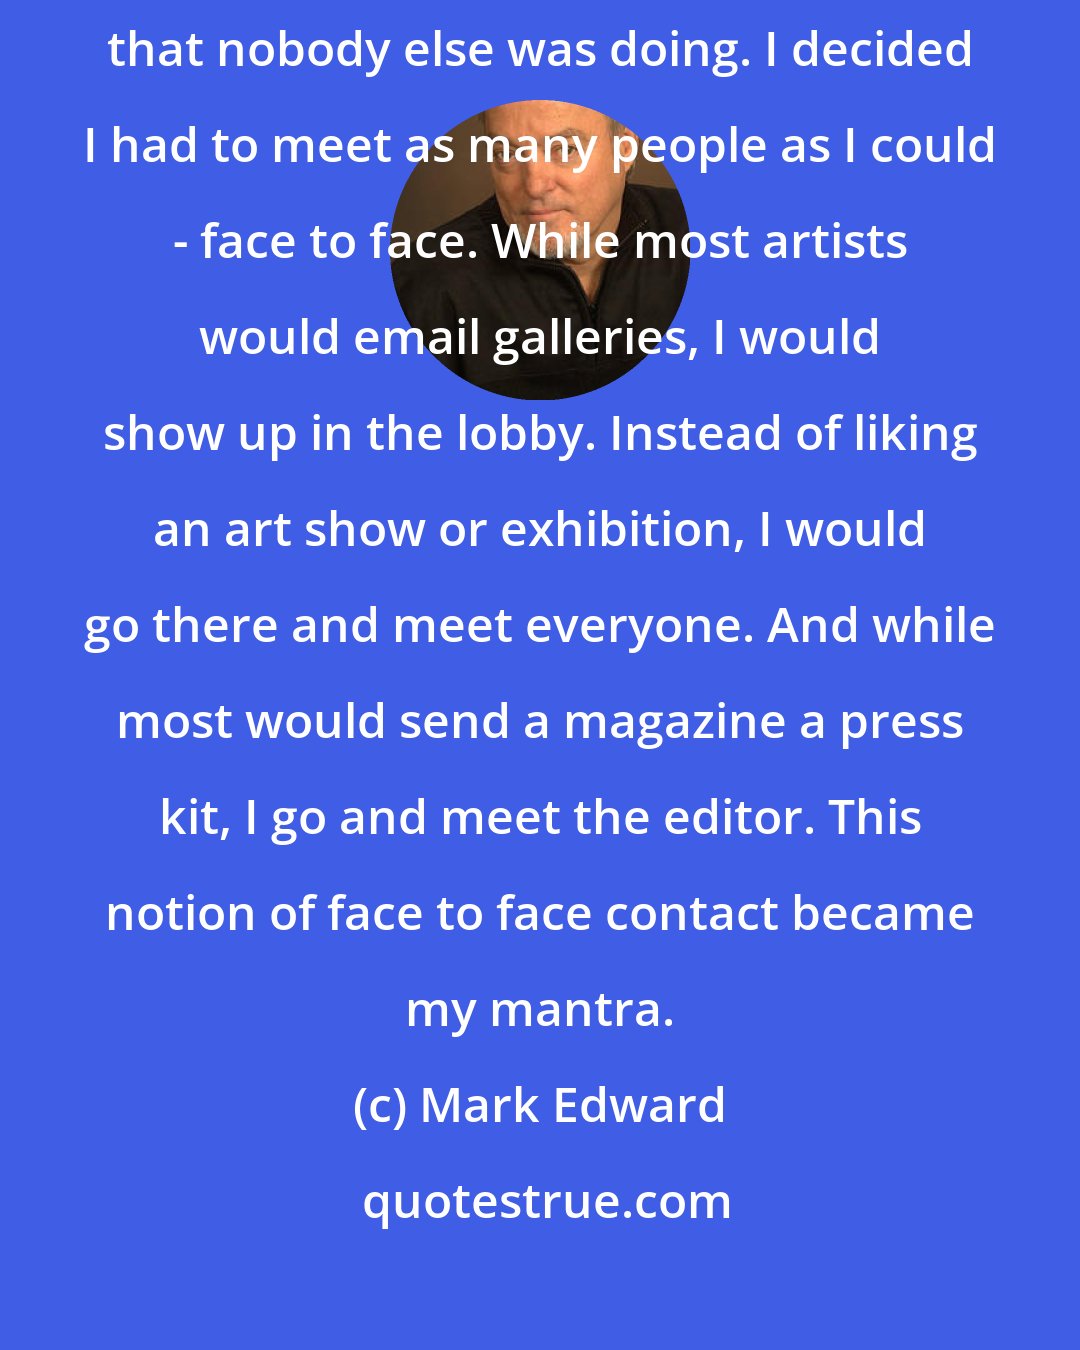 Mark Edward: While I was still going to embrace social media, I knew I had to do things that nobody else was doing. I decided I had to meet as many people as I could - face to face. While most artists would email galleries, I would show up in the lobby. Instead of liking an art show or exhibition, I would go there and meet everyone. And while most would send a magazine a press kit, I go and meet the editor. This notion of face to face contact became my mantra.